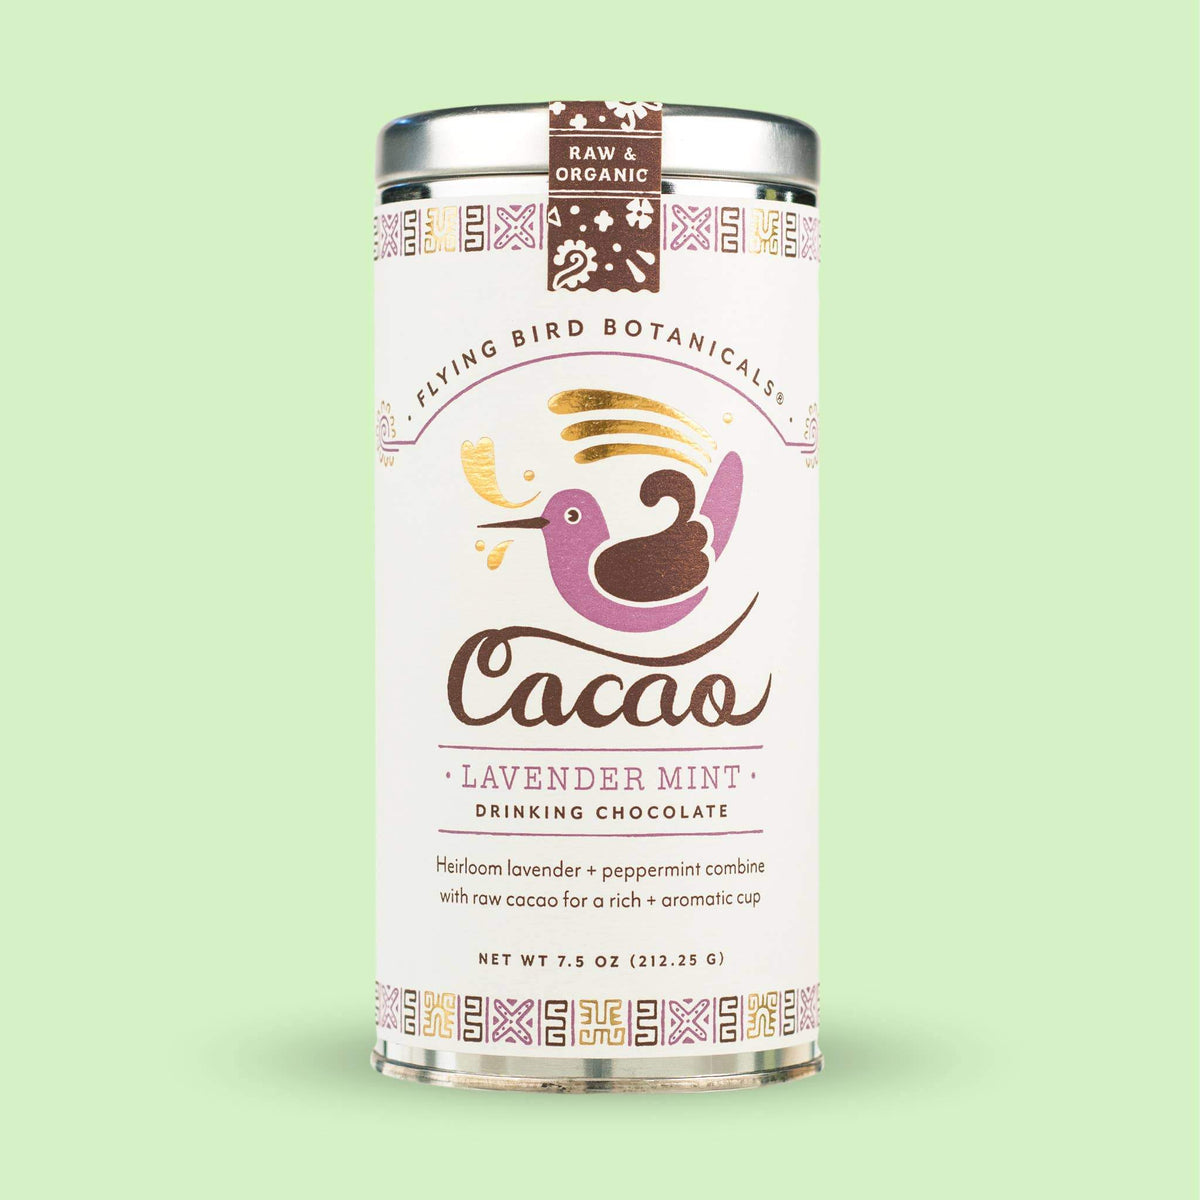 A large tin of Flying Bird Botanicals Lavender Mint Cacao drinking chocolate, featuring ornate patterns and a playful bird illustration on a mint green background.